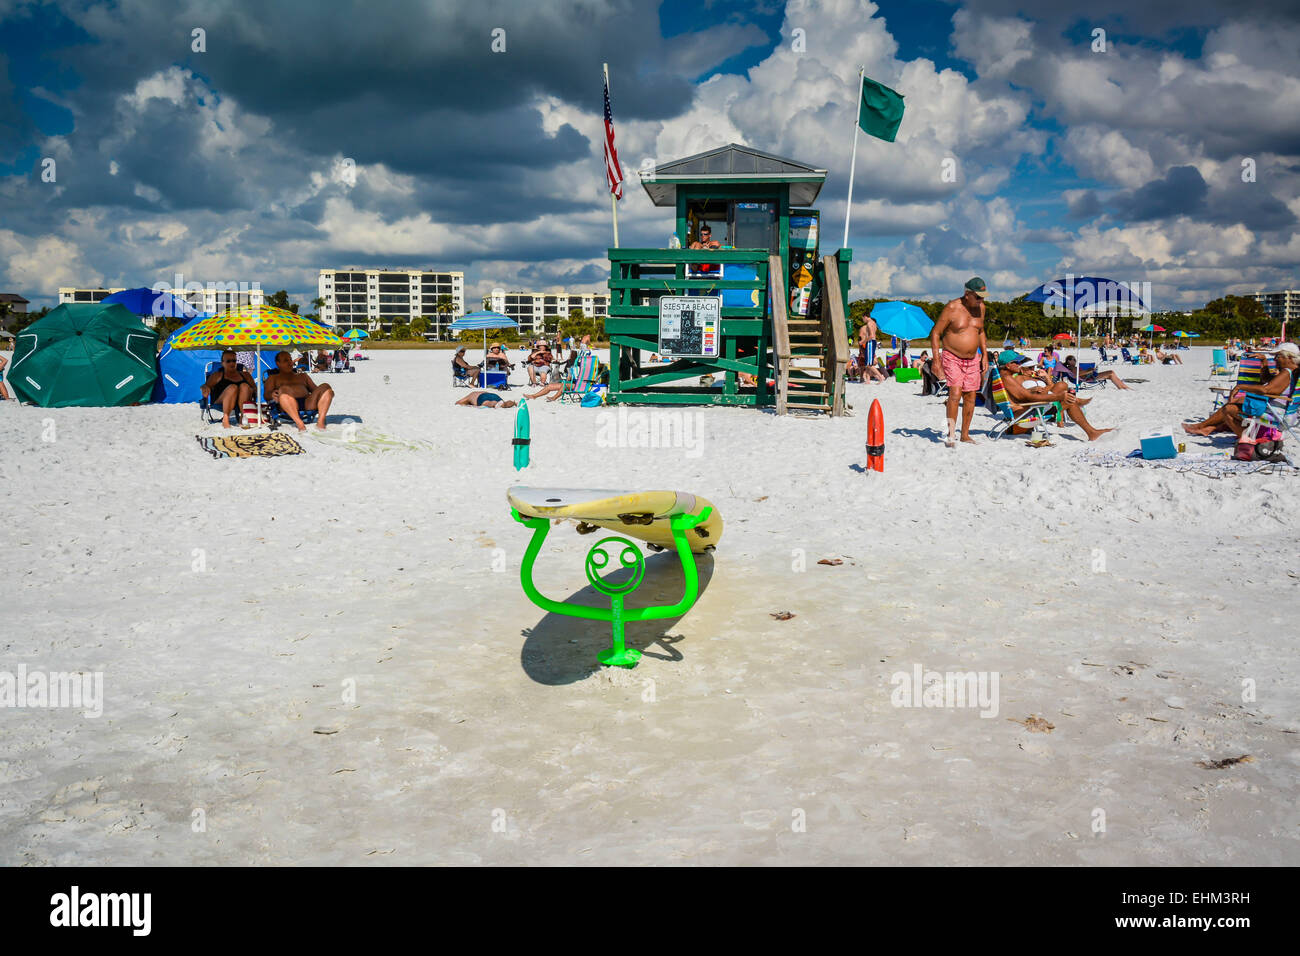 A life guard keeps watch at his Siesta Key Beach station while beach goers enjoy the warm and cloudy day in Sarasota, Florida Stock Photo